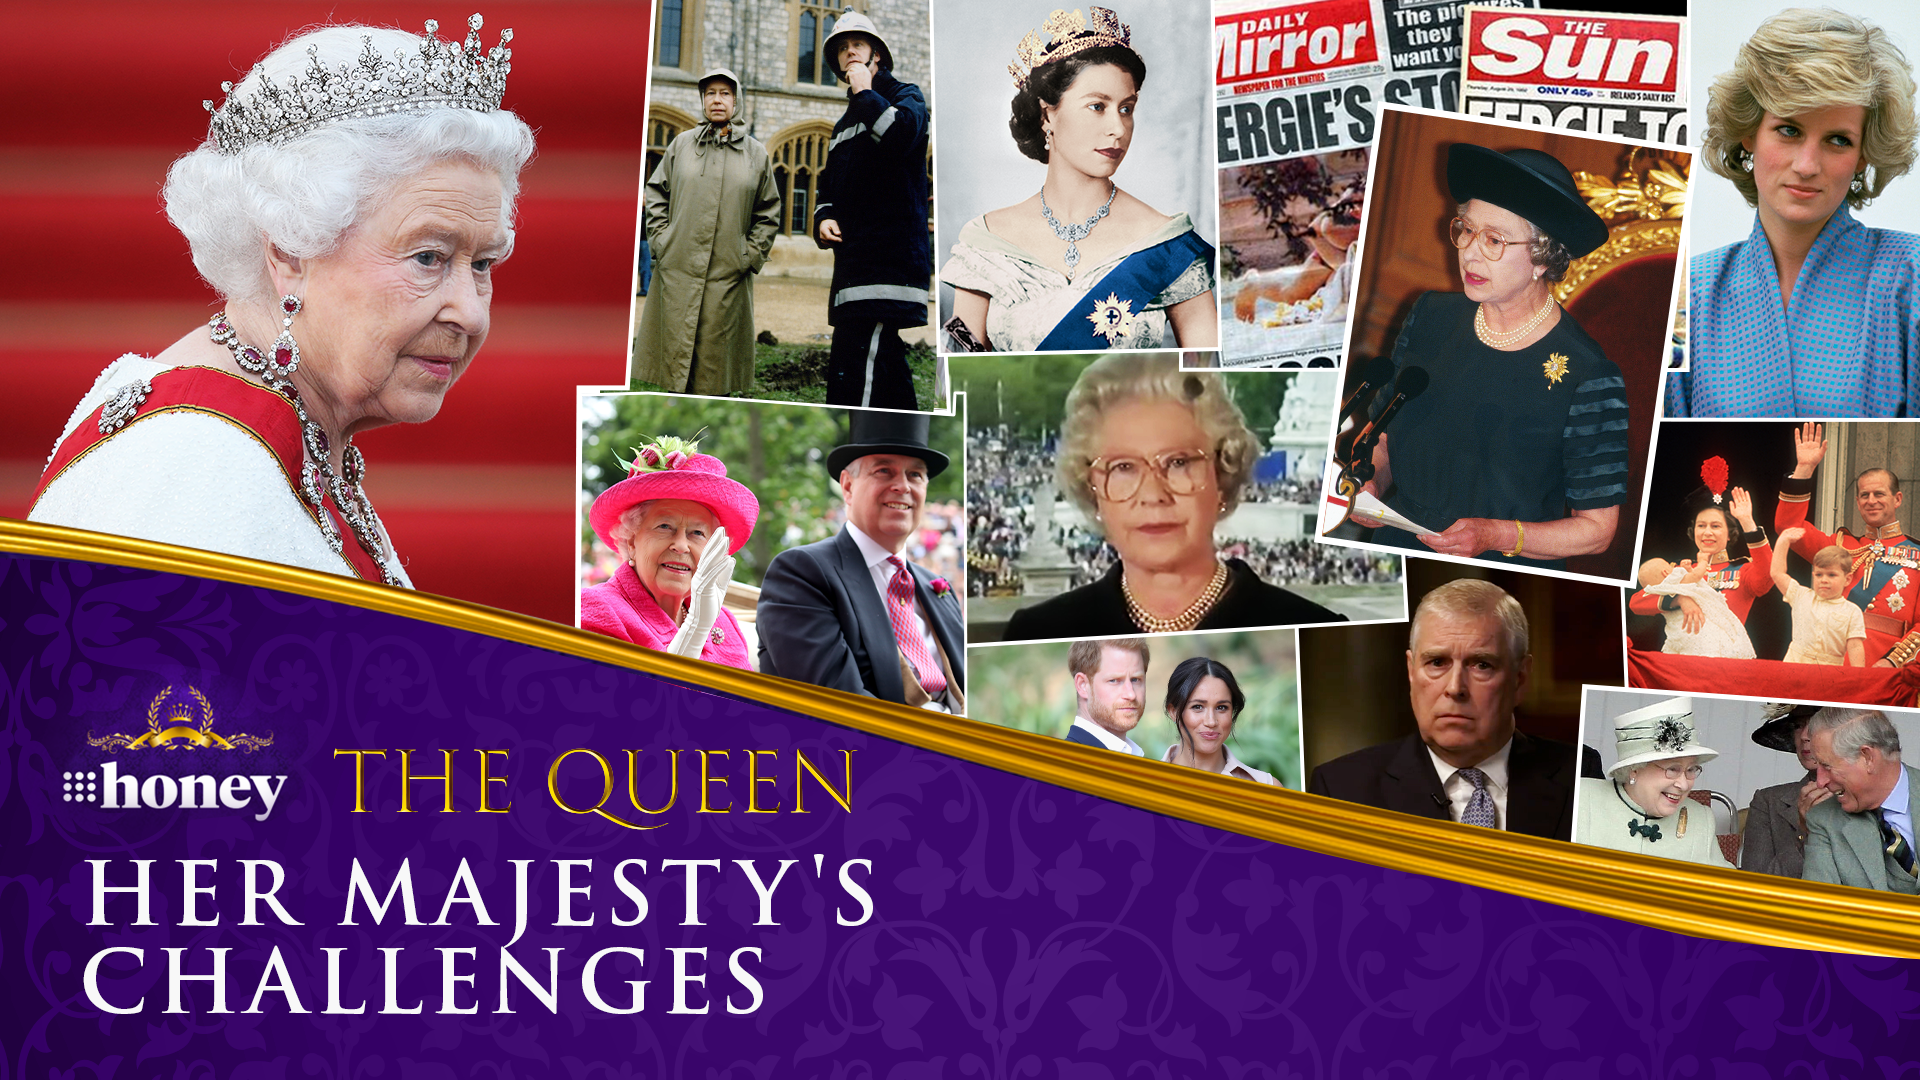 The most personal challenges of the Queen's reign